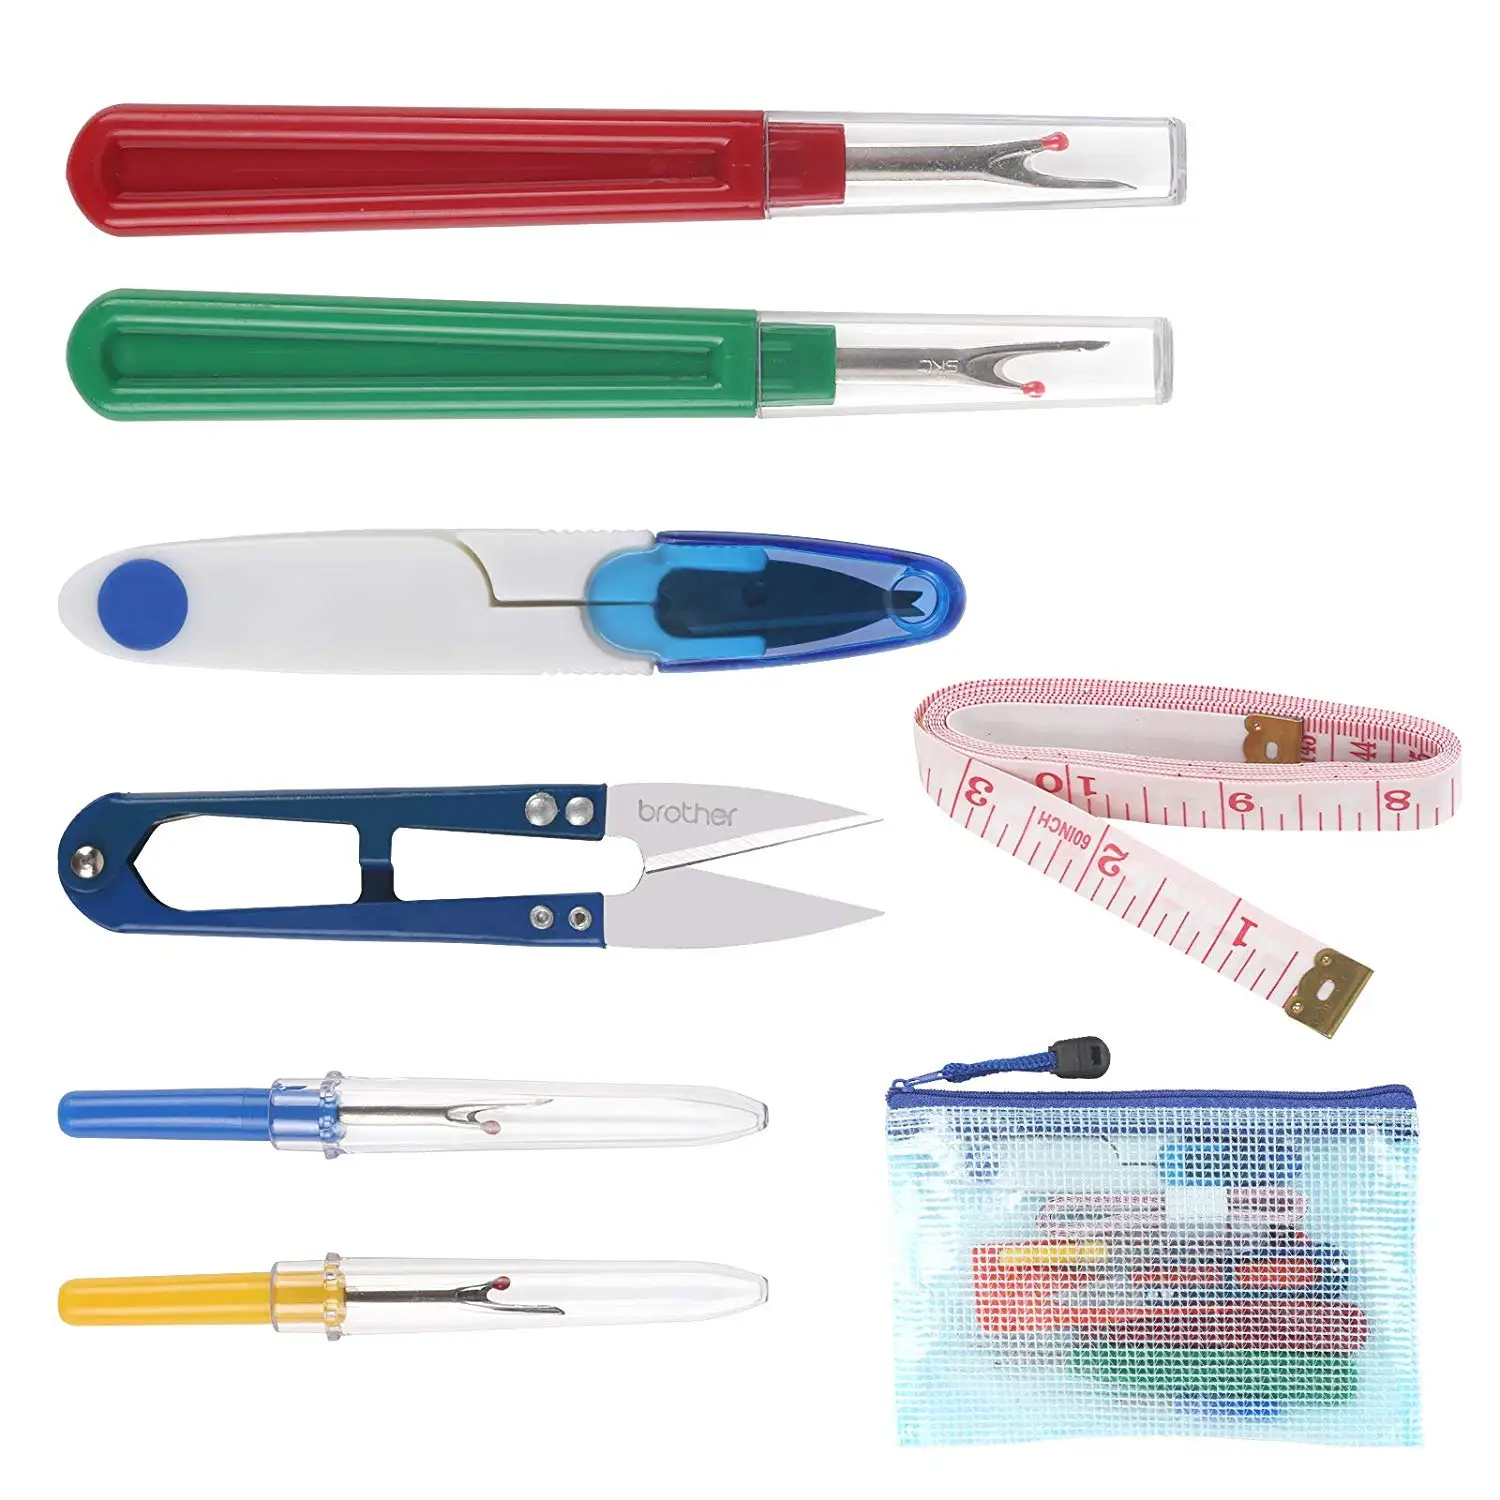 8pcs Seam Ripper Kit CHIFOOM Sewing Stitch Thread Unpicker with Scissor Soft Tape Measure and Storage Bag for Opening Seams and Hems Tools DIY Craft 